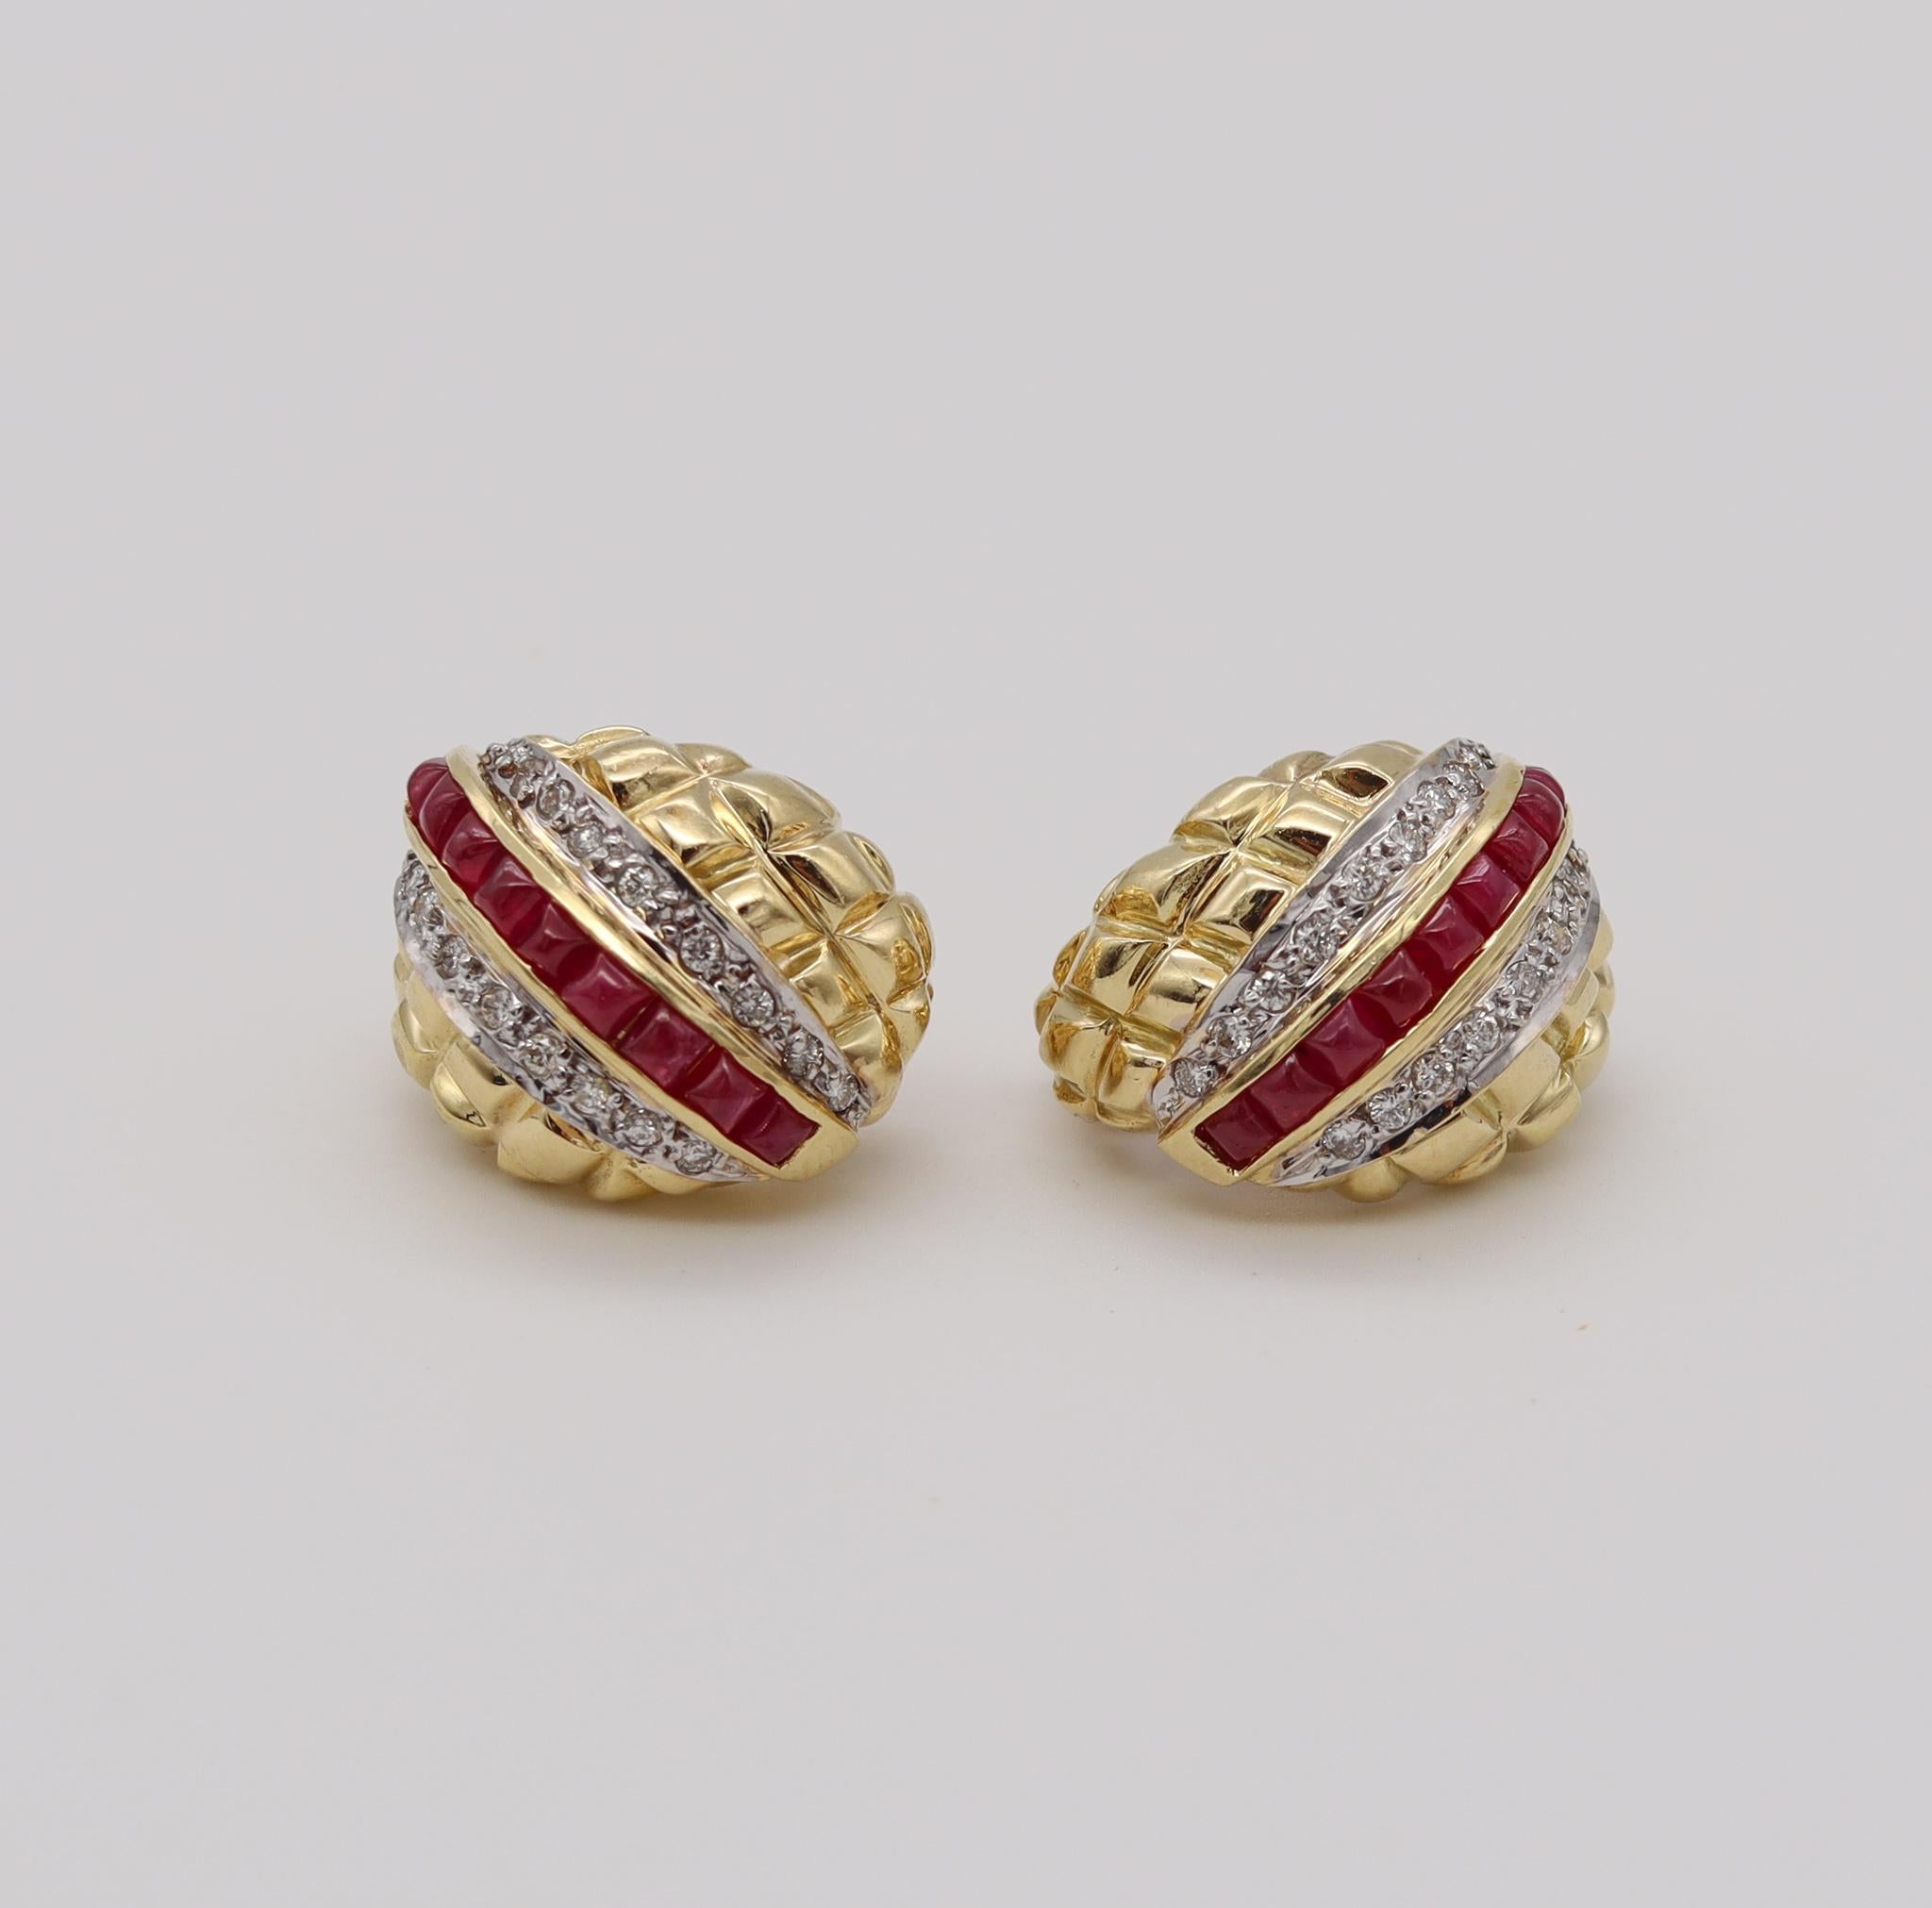 Modern 1970 Gem Set Clips Earrings in 18kt Yellow Gold 3.42 Cts Rubies Diamonds For Sale 1